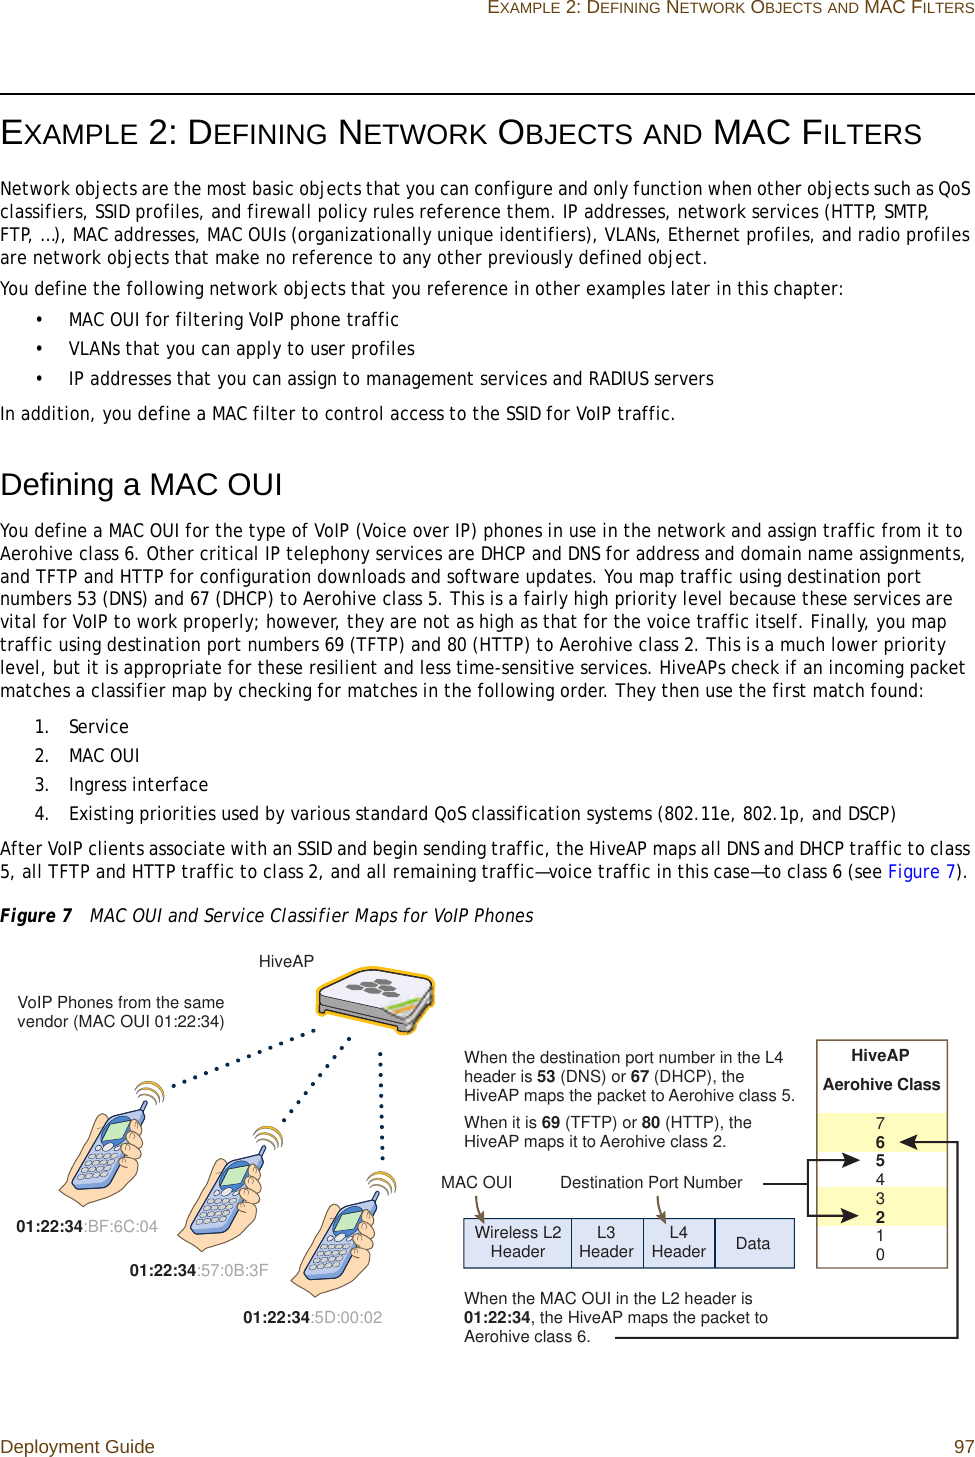 Deployment Guide 97EXAMPLE 2: DEFINING NETWORK OBJECTS AND MAC FILTERSEXAMPLE 2: DEFINING NETWORK OBJECTS AND MAC FILTERSNetwork objects are the most basic objects that you can configure and only function when other objects such as QoS classifiers, SSID profiles, and firewall policy rules reference them. IP addresses, network services (HTTP, SMTP, FTP, …), MAC addresses, MAC OUIs (organizationally unique identifiers), VLANs, Ethernet profiles, and radio profiles are network objects that make no reference to any other previously defined object.You define the following network objects that you reference in other examples later in this chapter:• MAC OUI for filtering VoIP phone traffic• VLANs that you can apply to user profiles• IP addresses that you can assign to management services and RADIUS serversIn addition, you define a MAC filter to control access to the SSID for VoIP traffic.Defining a MAC OUIYou define a MAC OUI for the type of VoIP (Voice over IP) phones in use in the network and assign traffic from it to Aerohive class 6. Other critical IP telephony services are DHCP and DNS for address and domain name assignments, and TFTP and HTTP for configuration downloads and software updates. You map traffic using destination port numbers 53 (DNS) and 67 (DHCP) to Aerohive class 5. This is a fairly high priority level because these services are vital for VoIP to work properly; however, they are not as high as that for the voice traffic itself. Finally, you map traffic using destination port numbers 69 (TFTP) and 80 (HTTP) to Aerohive class 2. This is a much lower priority level, but it is appropriate for these resilient and less time-sensitive services. HiveAPs check if an incoming packet matches a classifier map by checking for matches in the following order. They then use the first match found:1. Service2. MAC OUI3. Ingress interface4. Existing priorities used by various standard QoS classification systems (802.11e, 802.1p, and DSCP)After VoIP clients associate with an SSID and begin sending traffic, the HiveAP maps all DNS and DHCP traffic to class 5, all TFTP and HTTP traffic to class 2, and all remaining traffic—voice traffic in this case—to class 6 (see Figure 7). Figure 7  MAC OUI and Service Classifier Maps for VoIP Phones01:22:34:BF:6C:0401:22:34:5D:00:0201:22:34:57:0B:3FDataL3 Header L4 HeaderWireless L2 HeaderDestination Port NumberHiveAPAerohive Class7 6 5 4 3 2 1 0When the destination port number in the L4 header is 53 (DNS) or 67 (DHCP), the HiveAP maps the packet to Aerohive class 5.When it is 69 (TFTP) or 80 (HTTP), the HiveAP maps it to Aerohive class 2.When the MAC OUI in the L2 header is 01:22:34, the HiveAP maps the packet to Aerohive class 6.HiveAPVoIP Phones from the same vendor (MAC OUI 01:22:34)MAC OUI